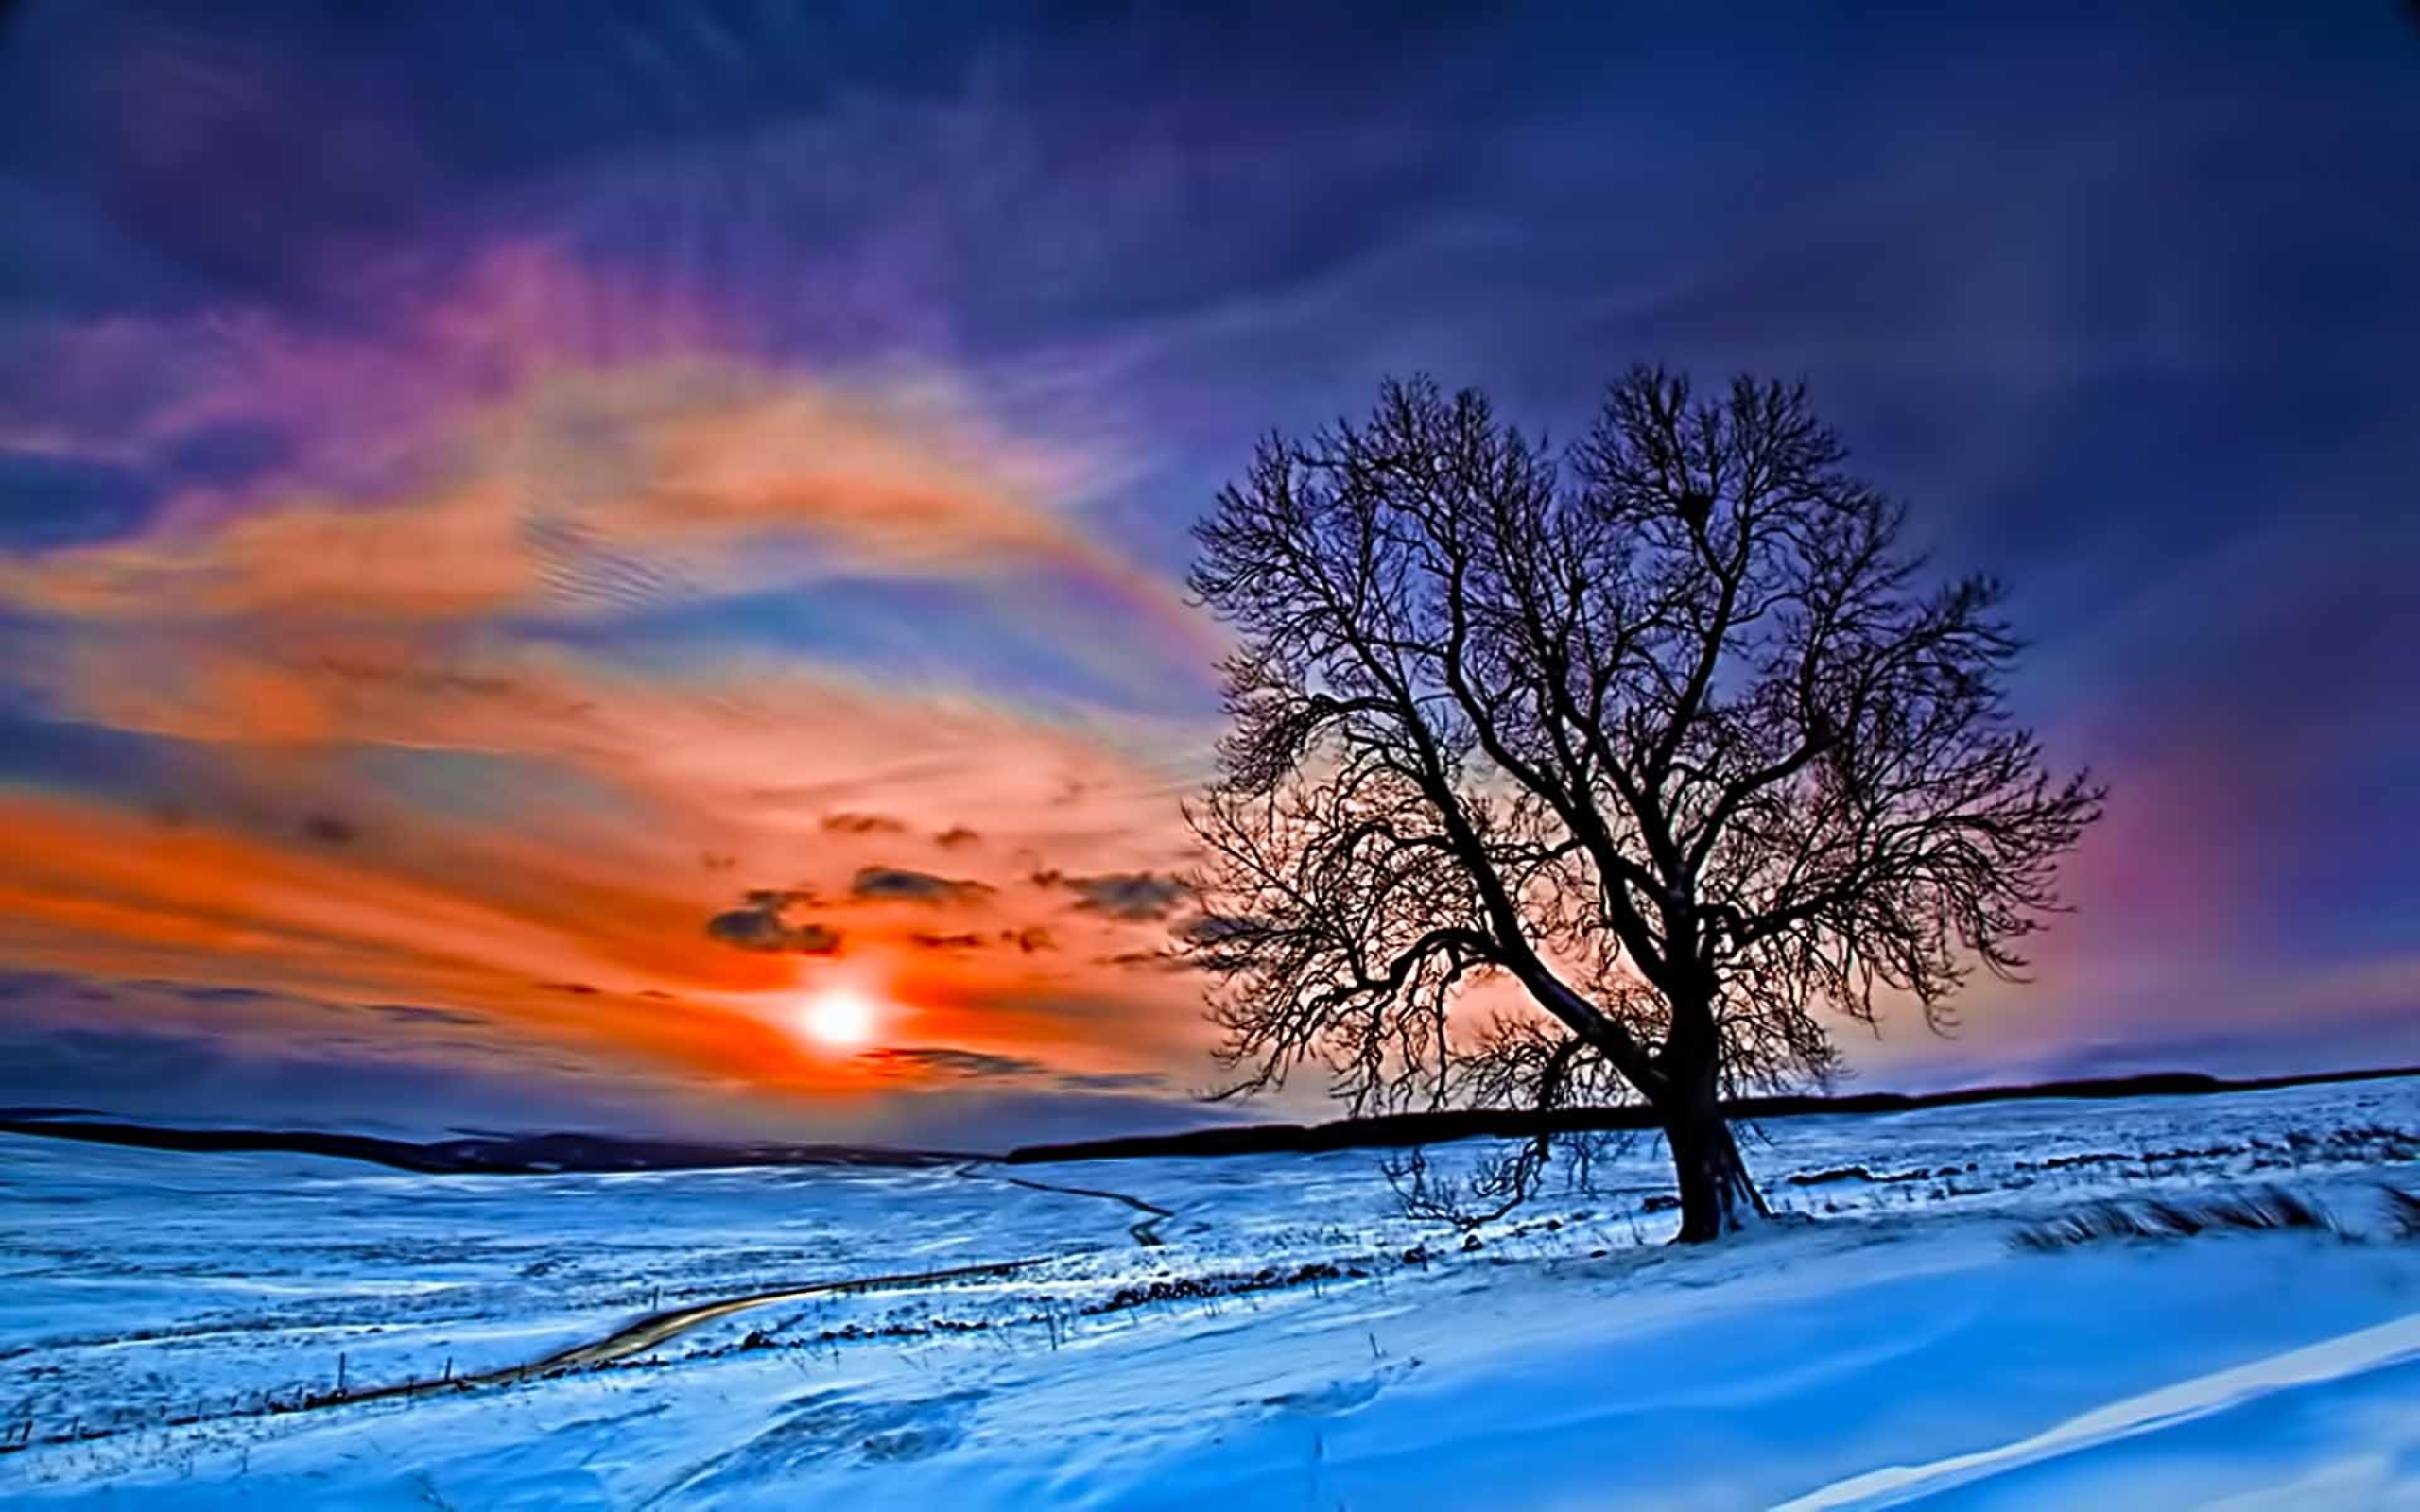 Sunset in winter | HD Wallpapers